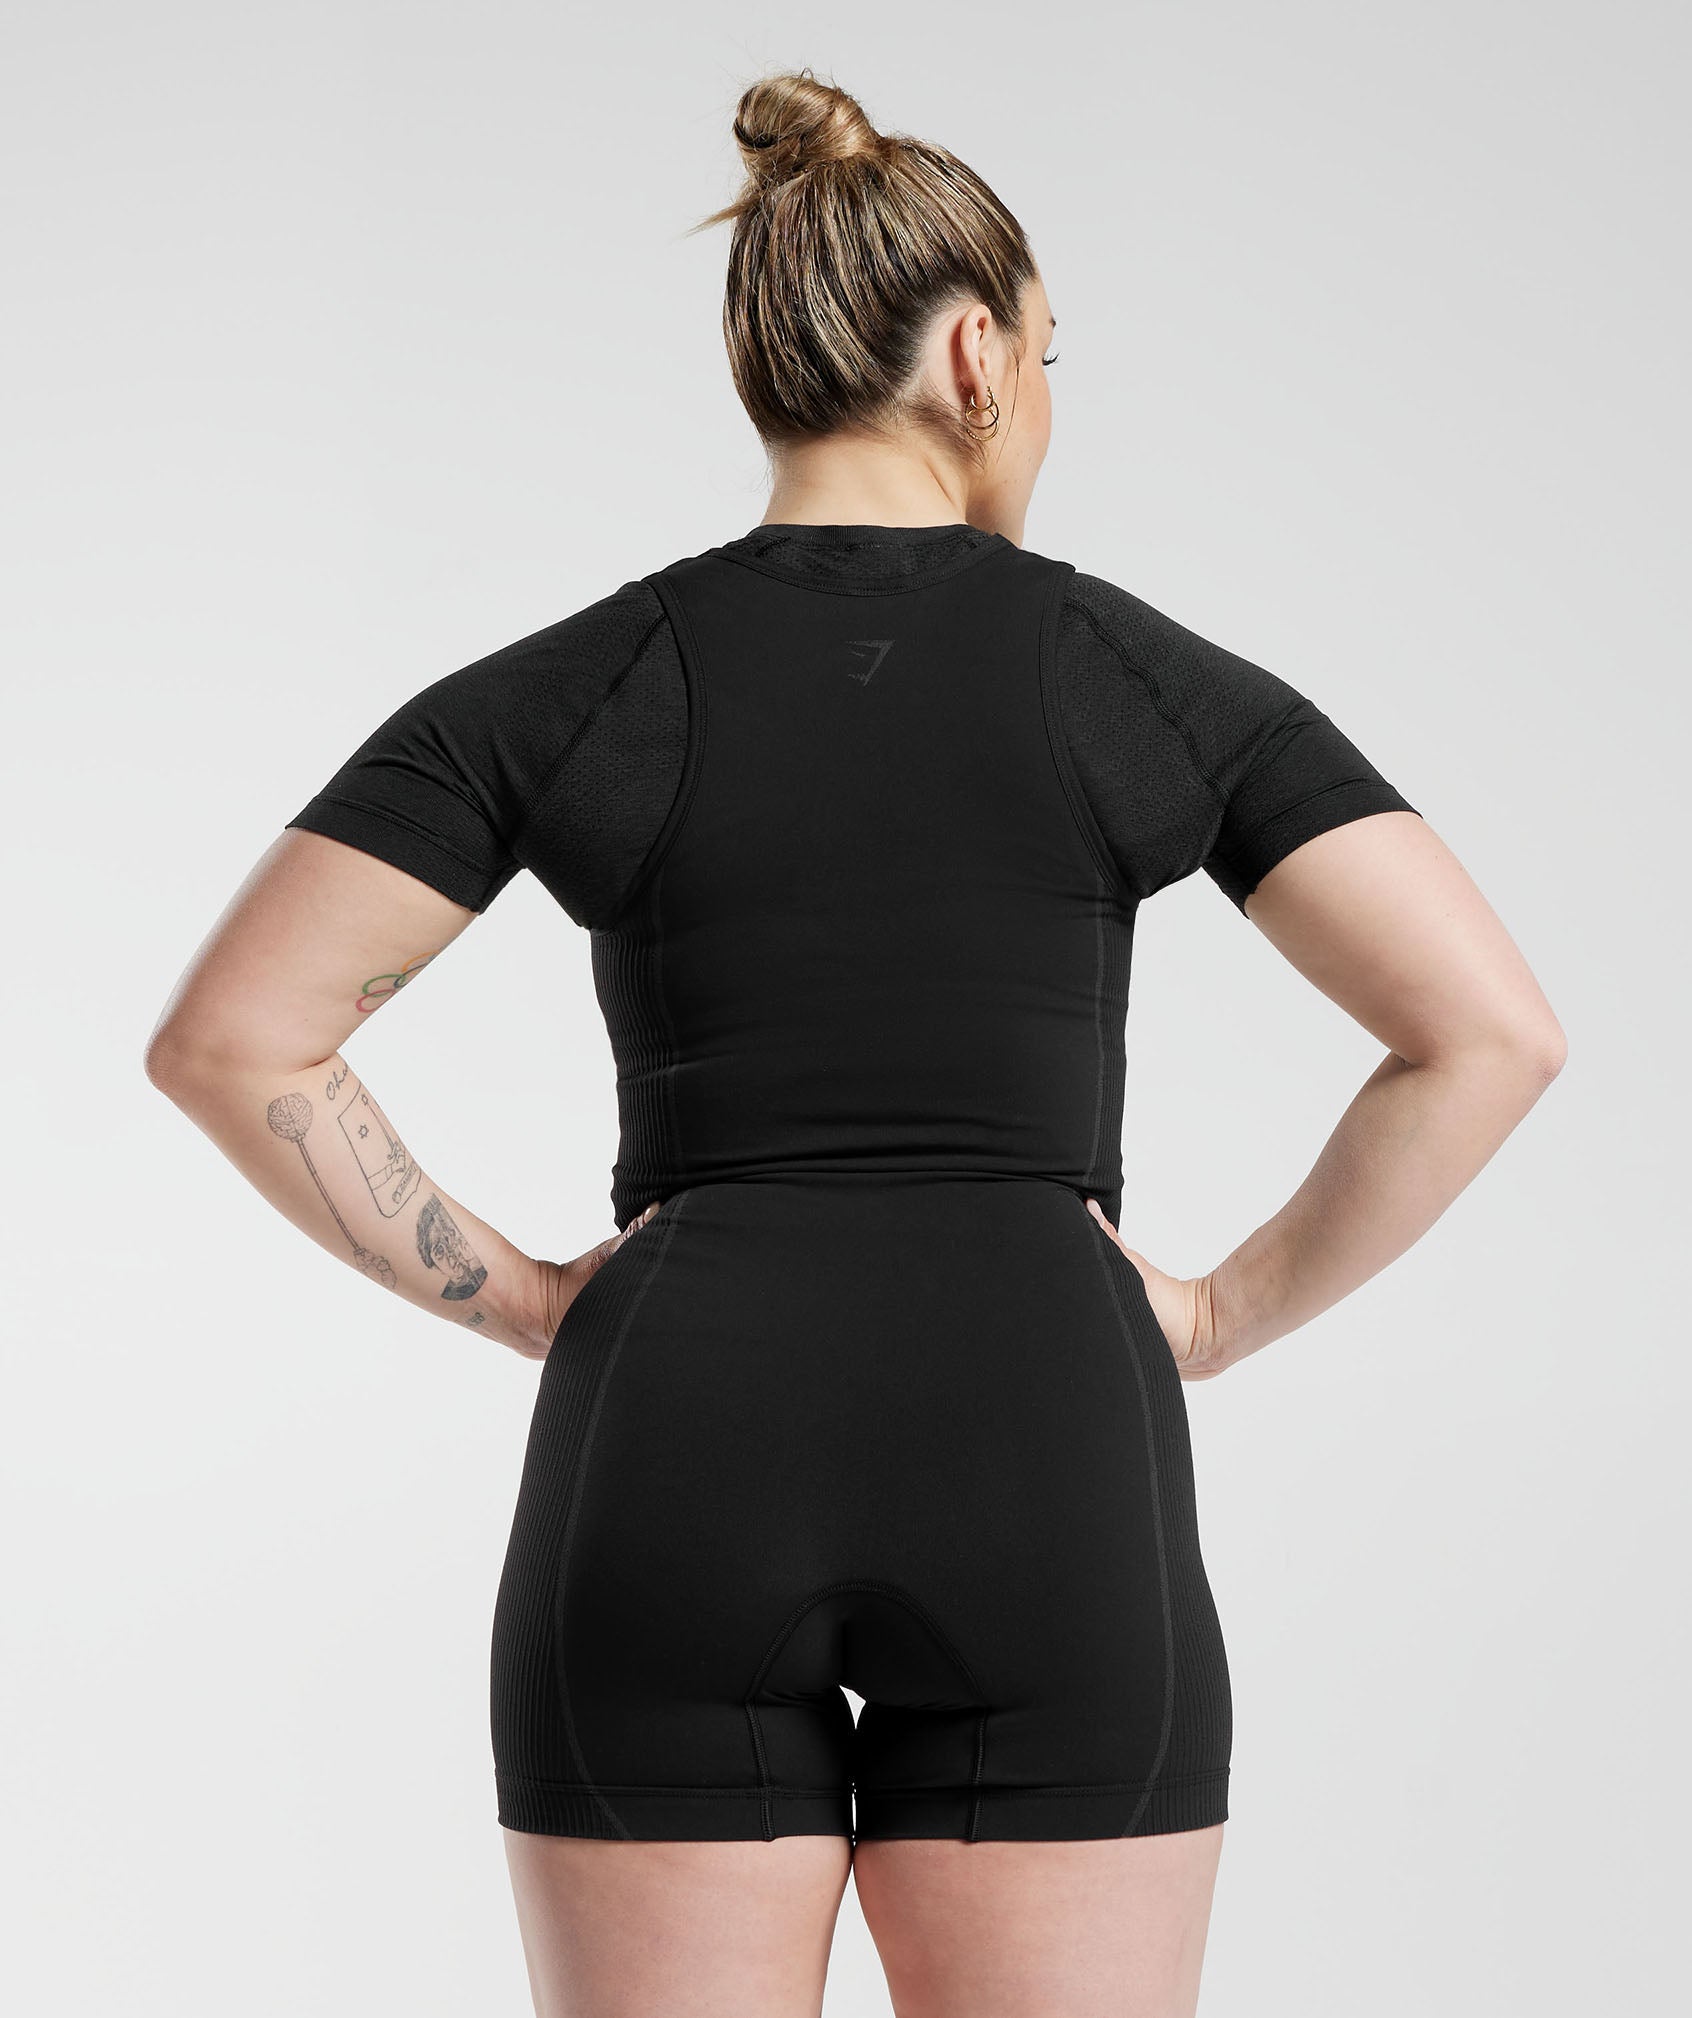 Seamless Singlet in Black/Charcoal Grey - view 2